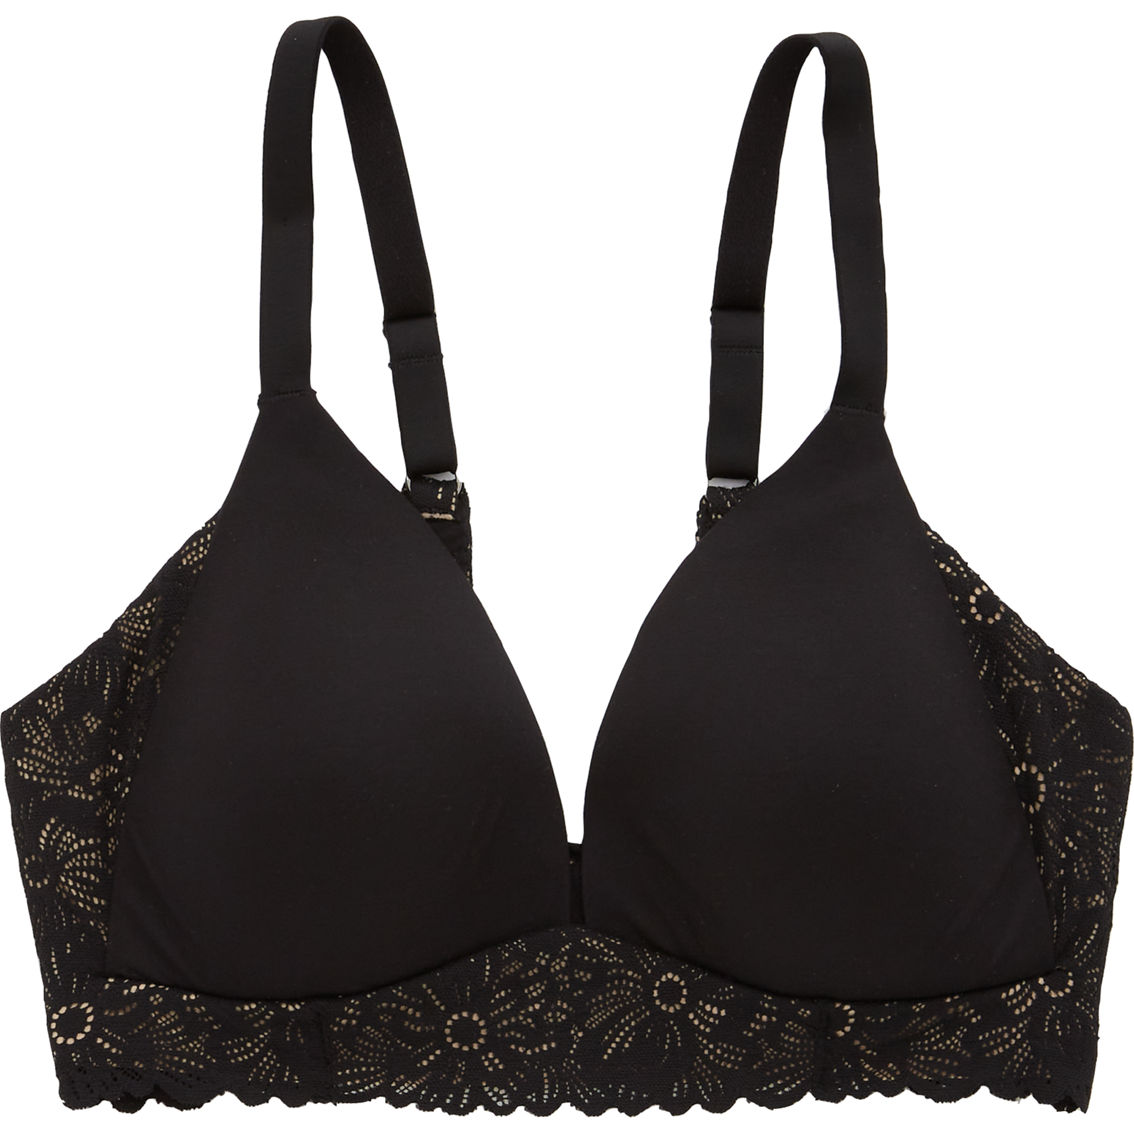 Aerie Real Sunnie Wireless Lightly Lined Blossom Lace Trim Bra, Bras, Clothing & Accessories